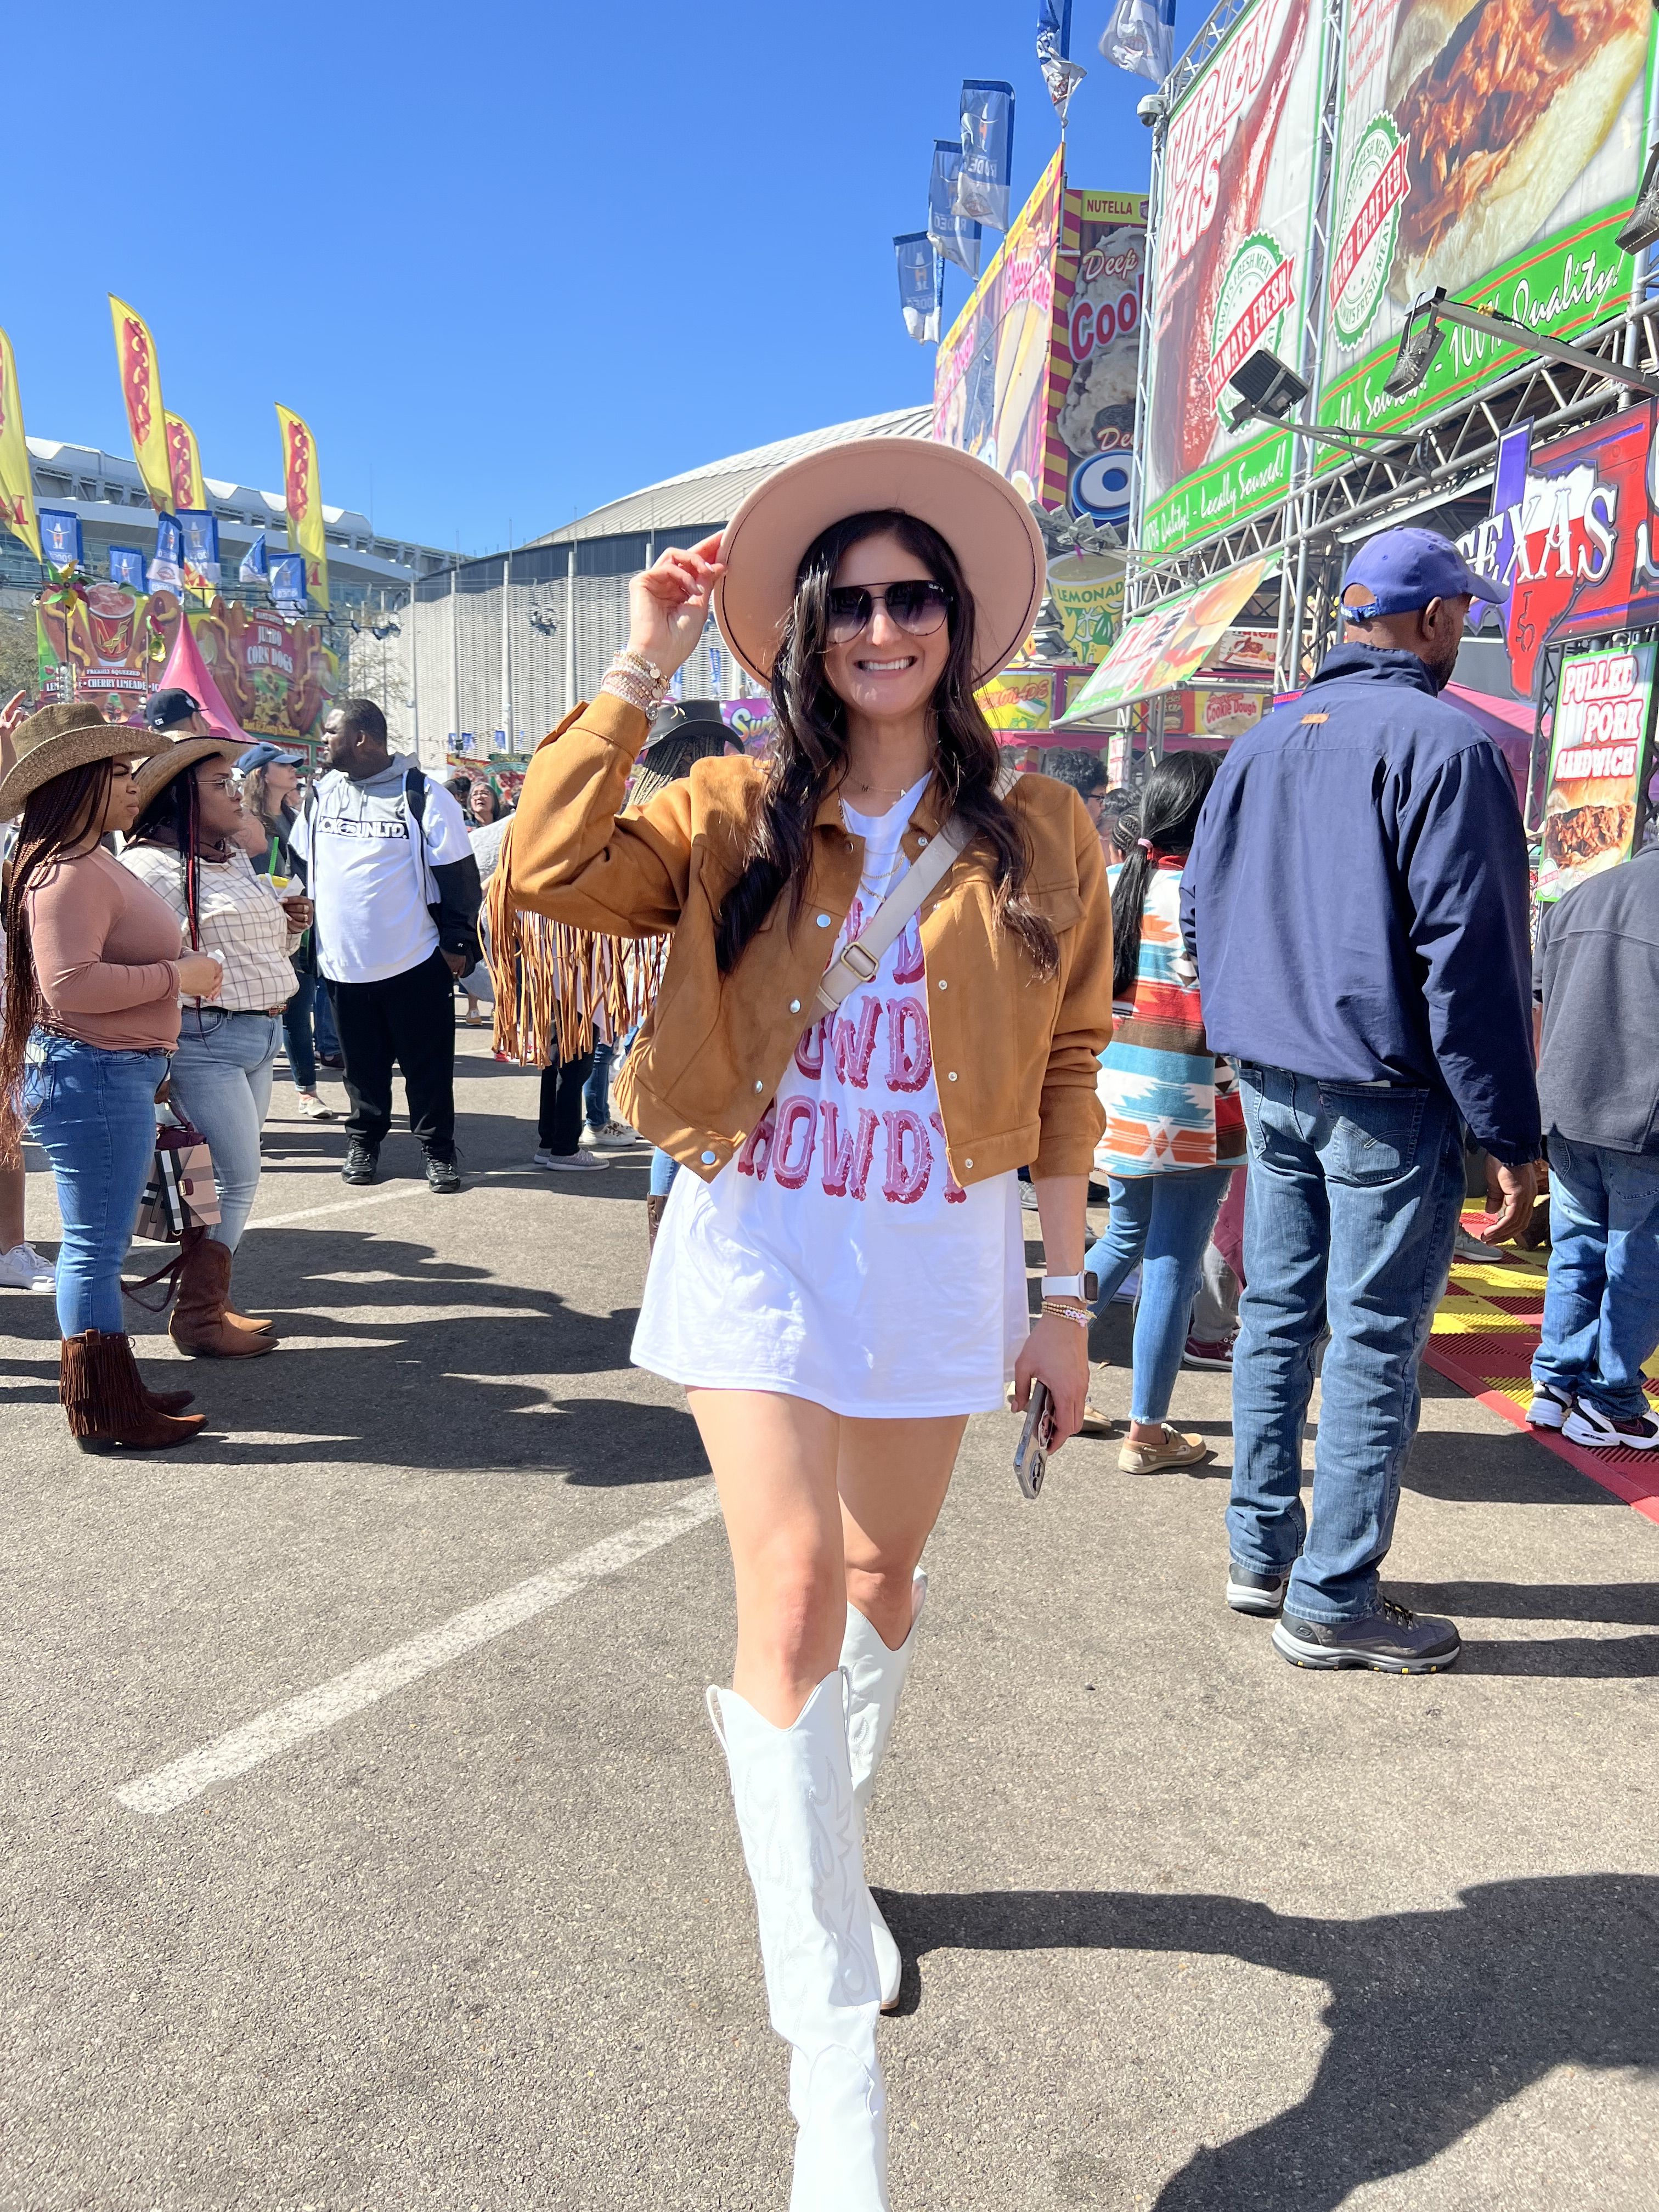 Country concert outfit: Tee shirt that says howdy, suede fringe jacket, white boots, and cowboy hat. Houston Texas